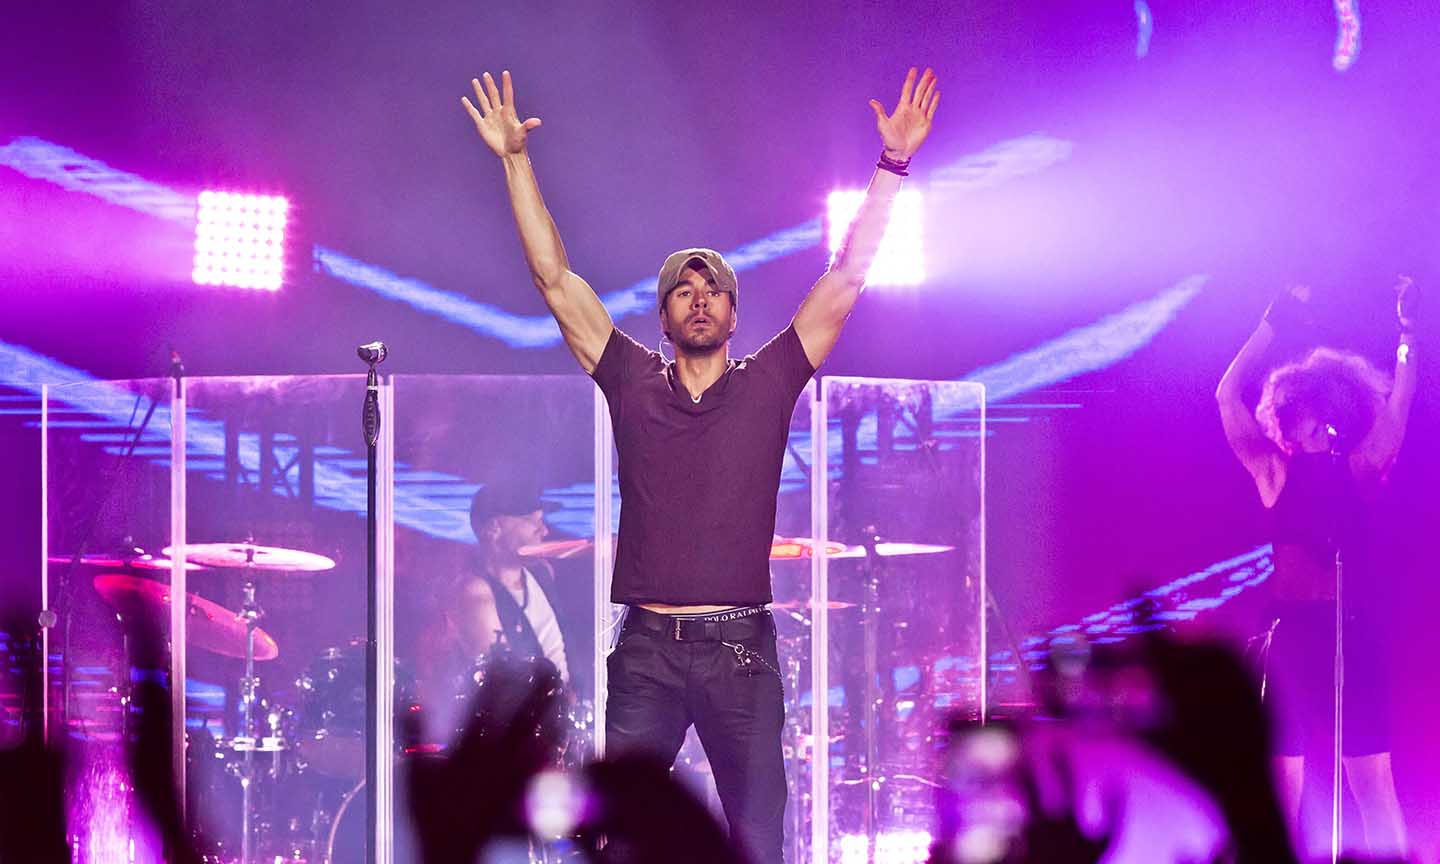 Hero: How Enrique Iglesias Became The King Of Latin Pop